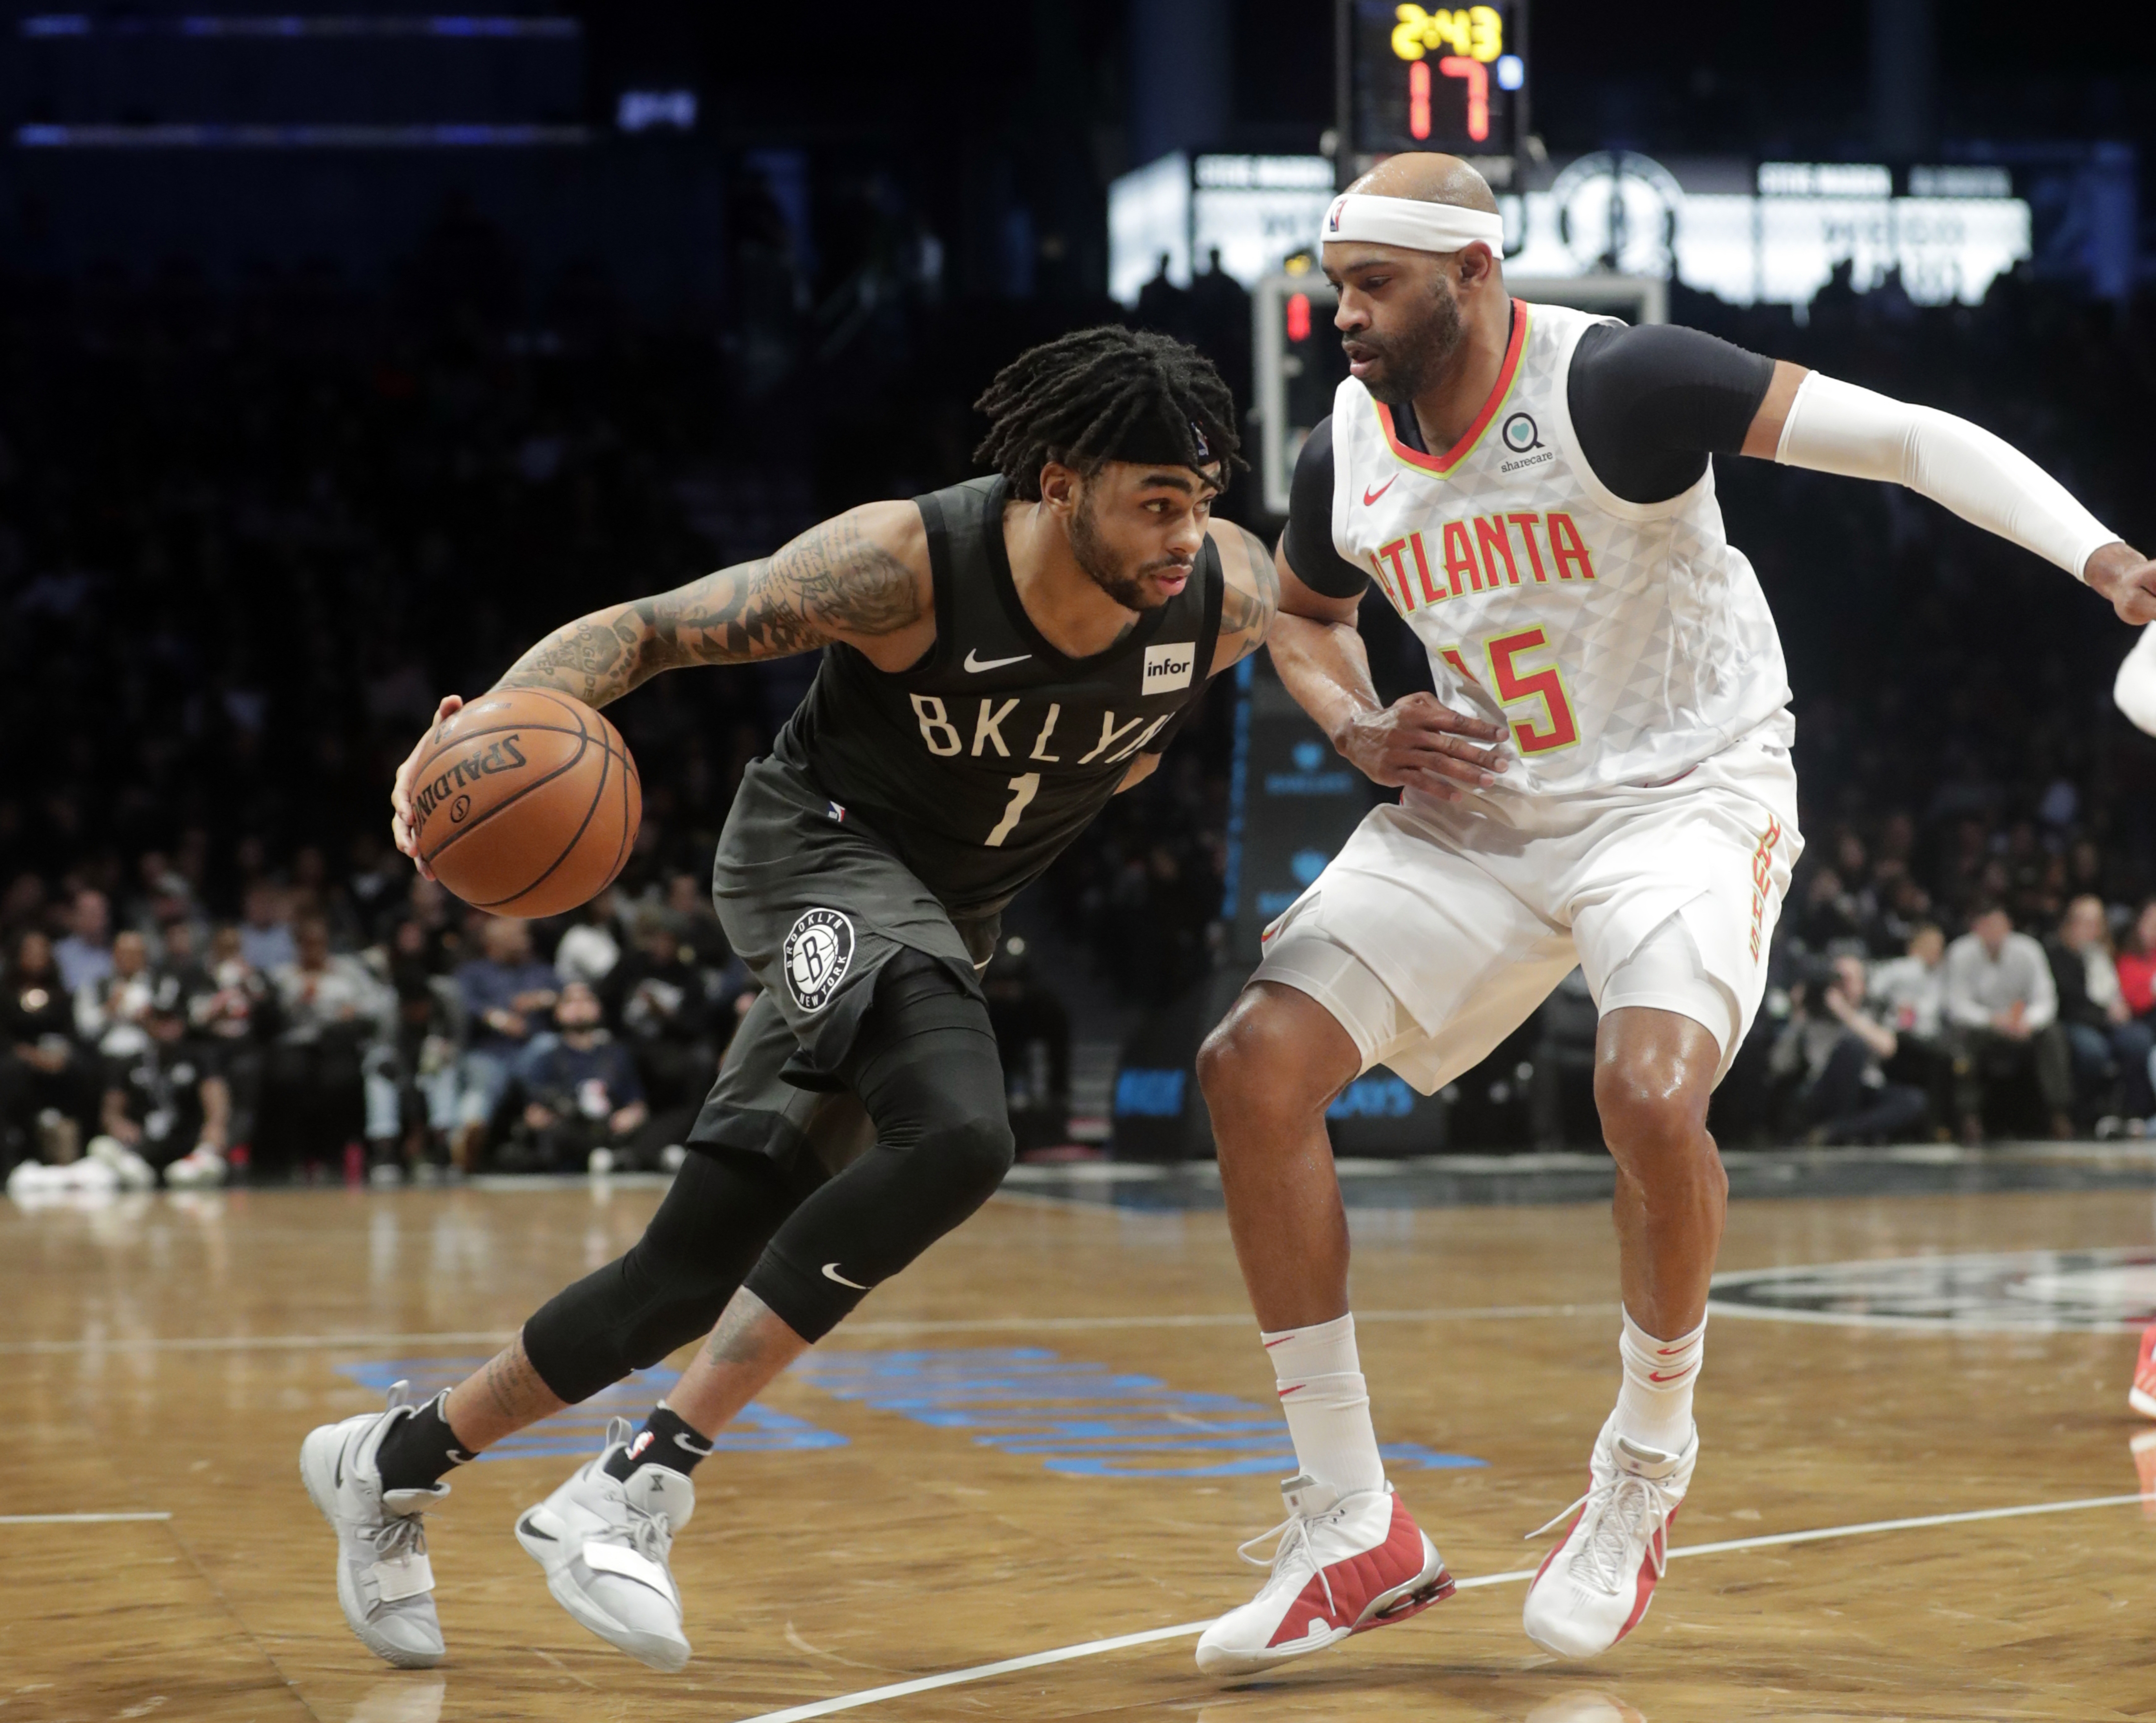 Brooklyn Nets' D'Angelo Russell (1) drives past Atlanta Hawks' Vince Carter (15) during the second half of an NBA basketball game Sunday, Dec. 16, 2018, in New York. The Nets won 144-127. (AP Photo/Frank Franklin II)